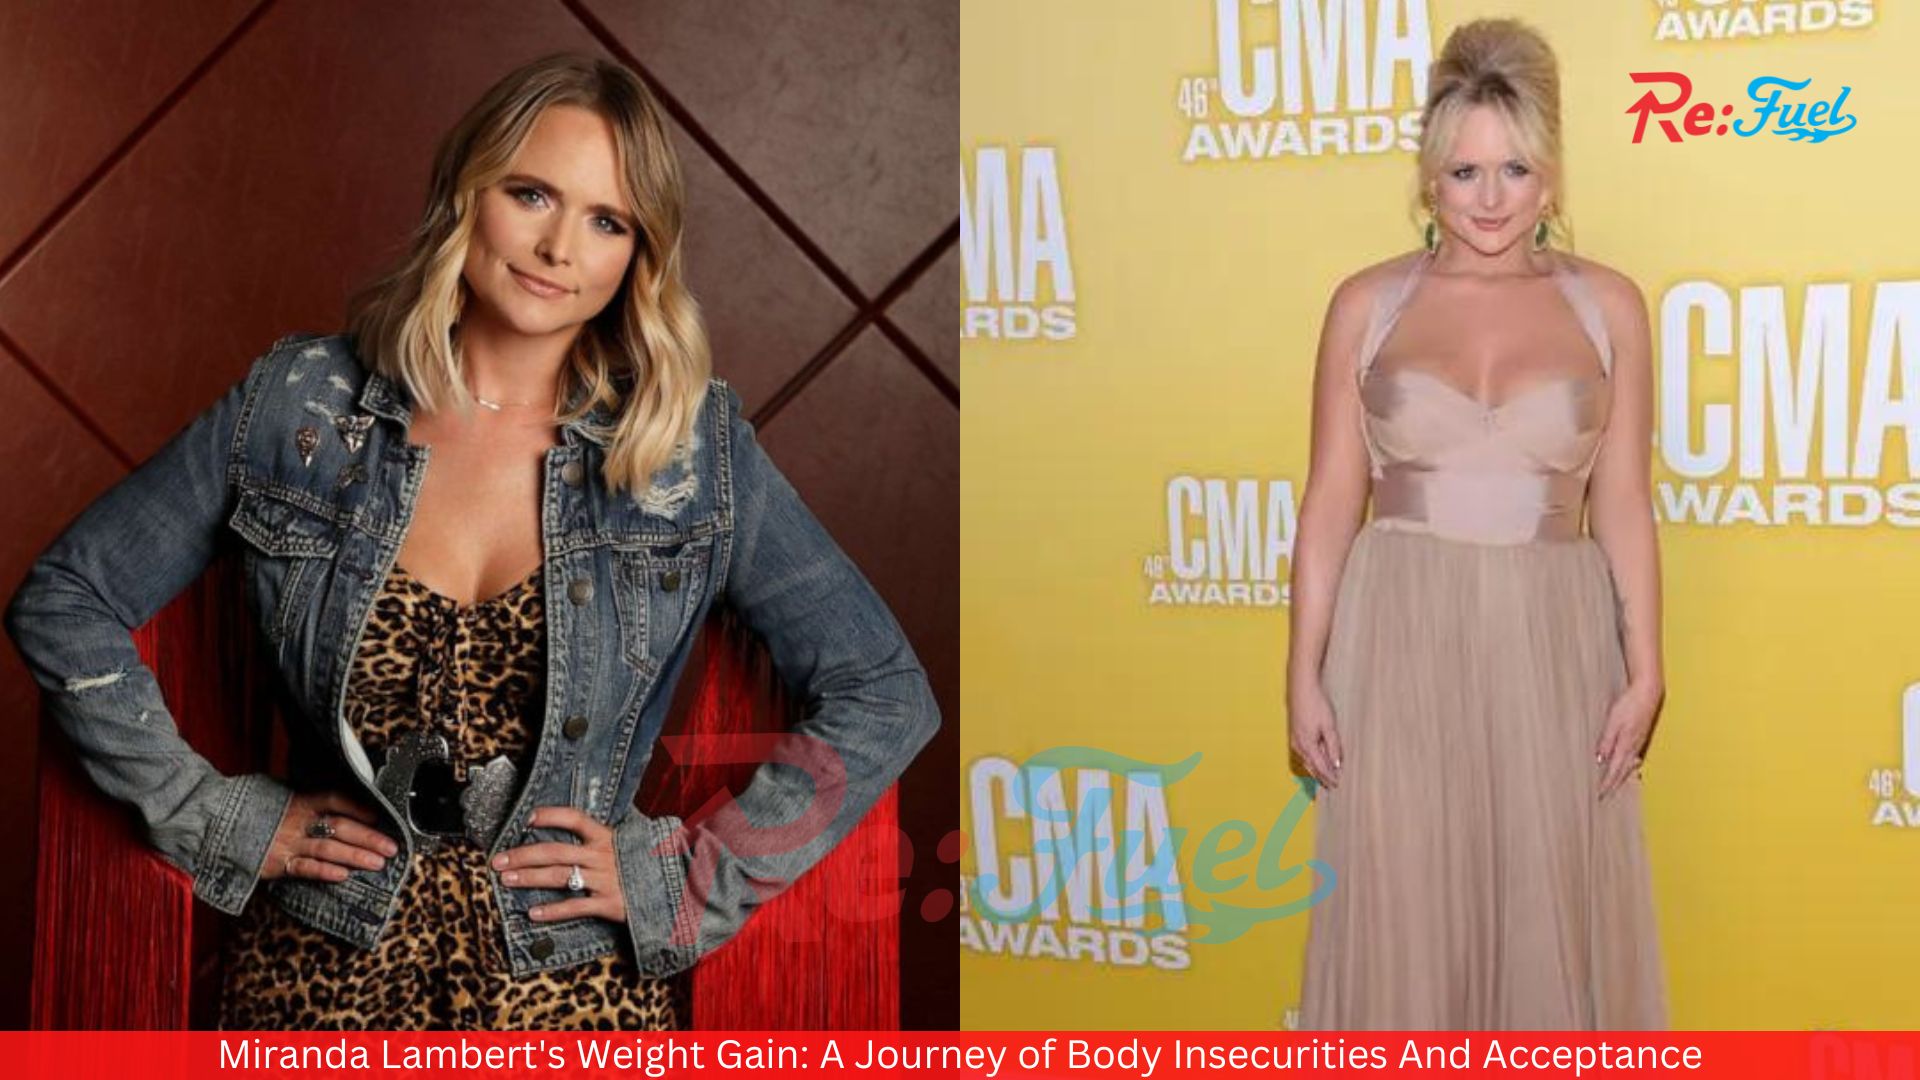 Miranda Lambert's Weight Gain: A Journey of Body Insecurities And Acceptance